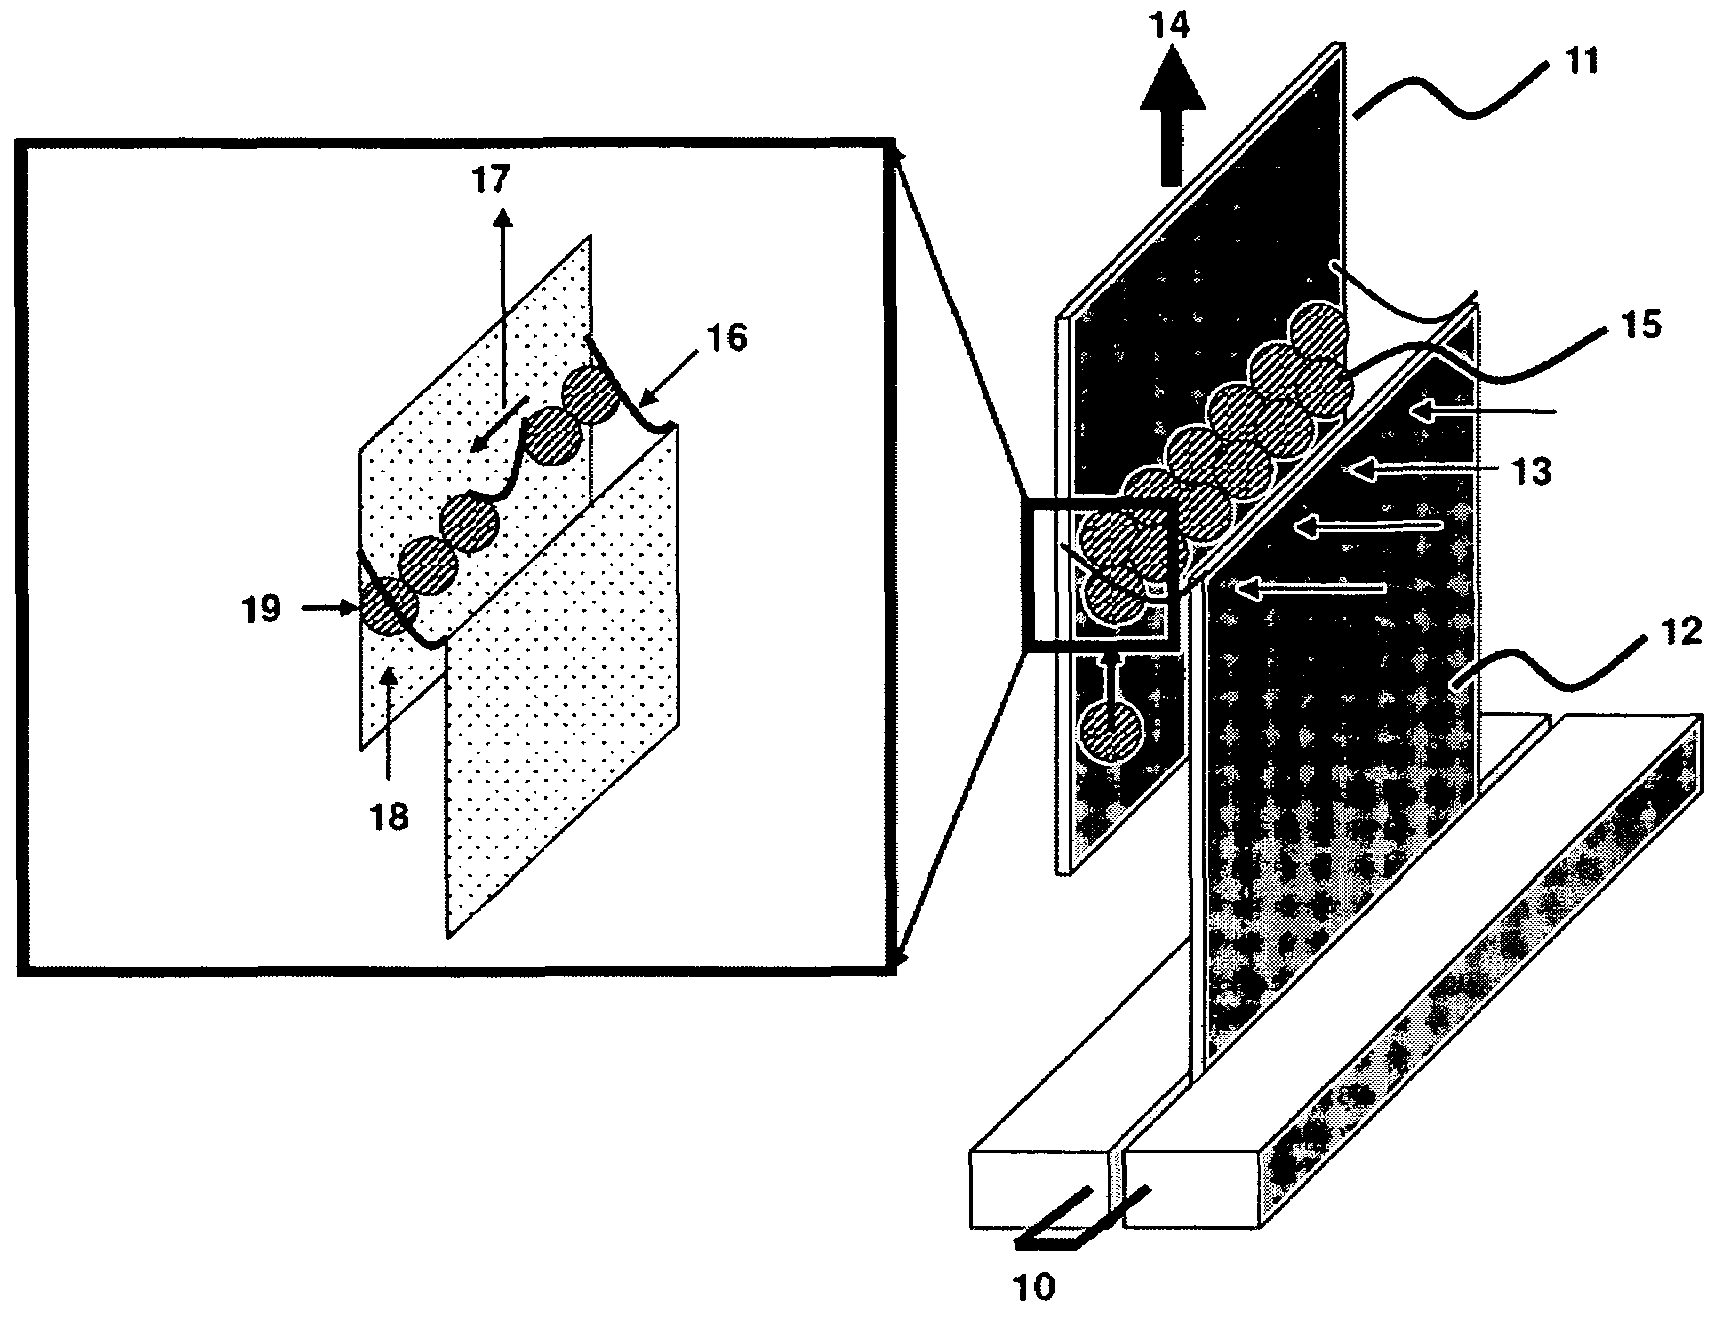 Method for manufacturing colloidal crystals via confined convective assembly